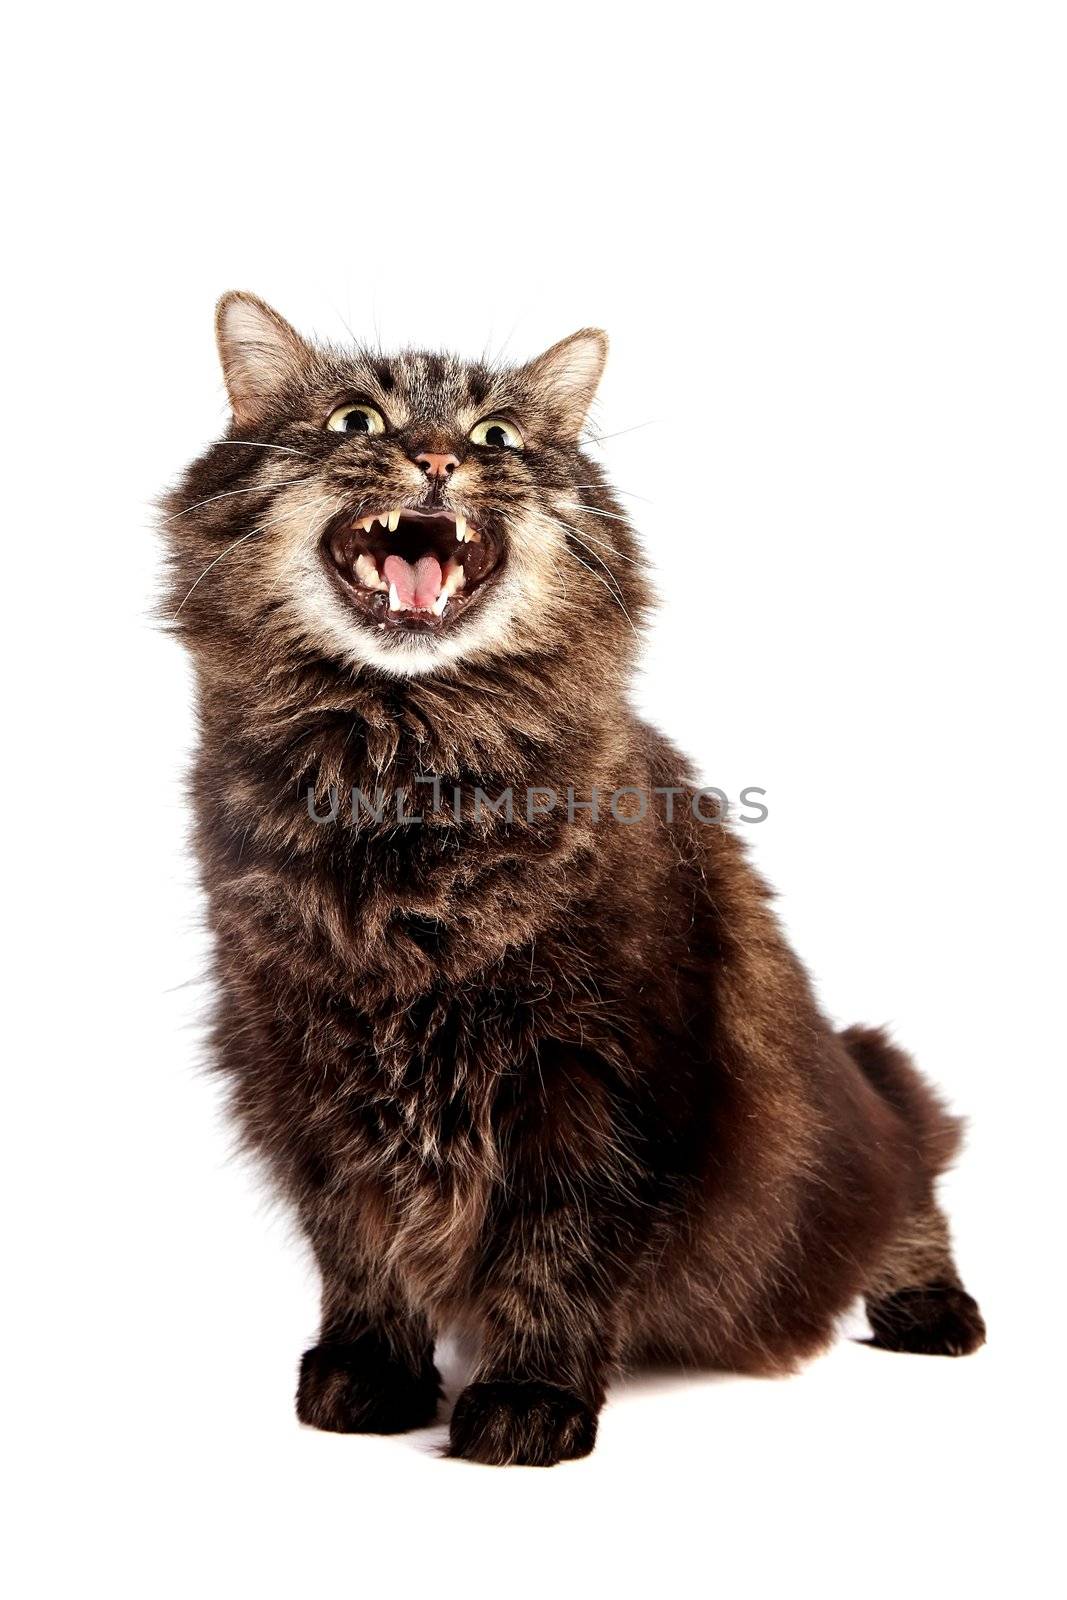 Fluffy mewing cat on a white background